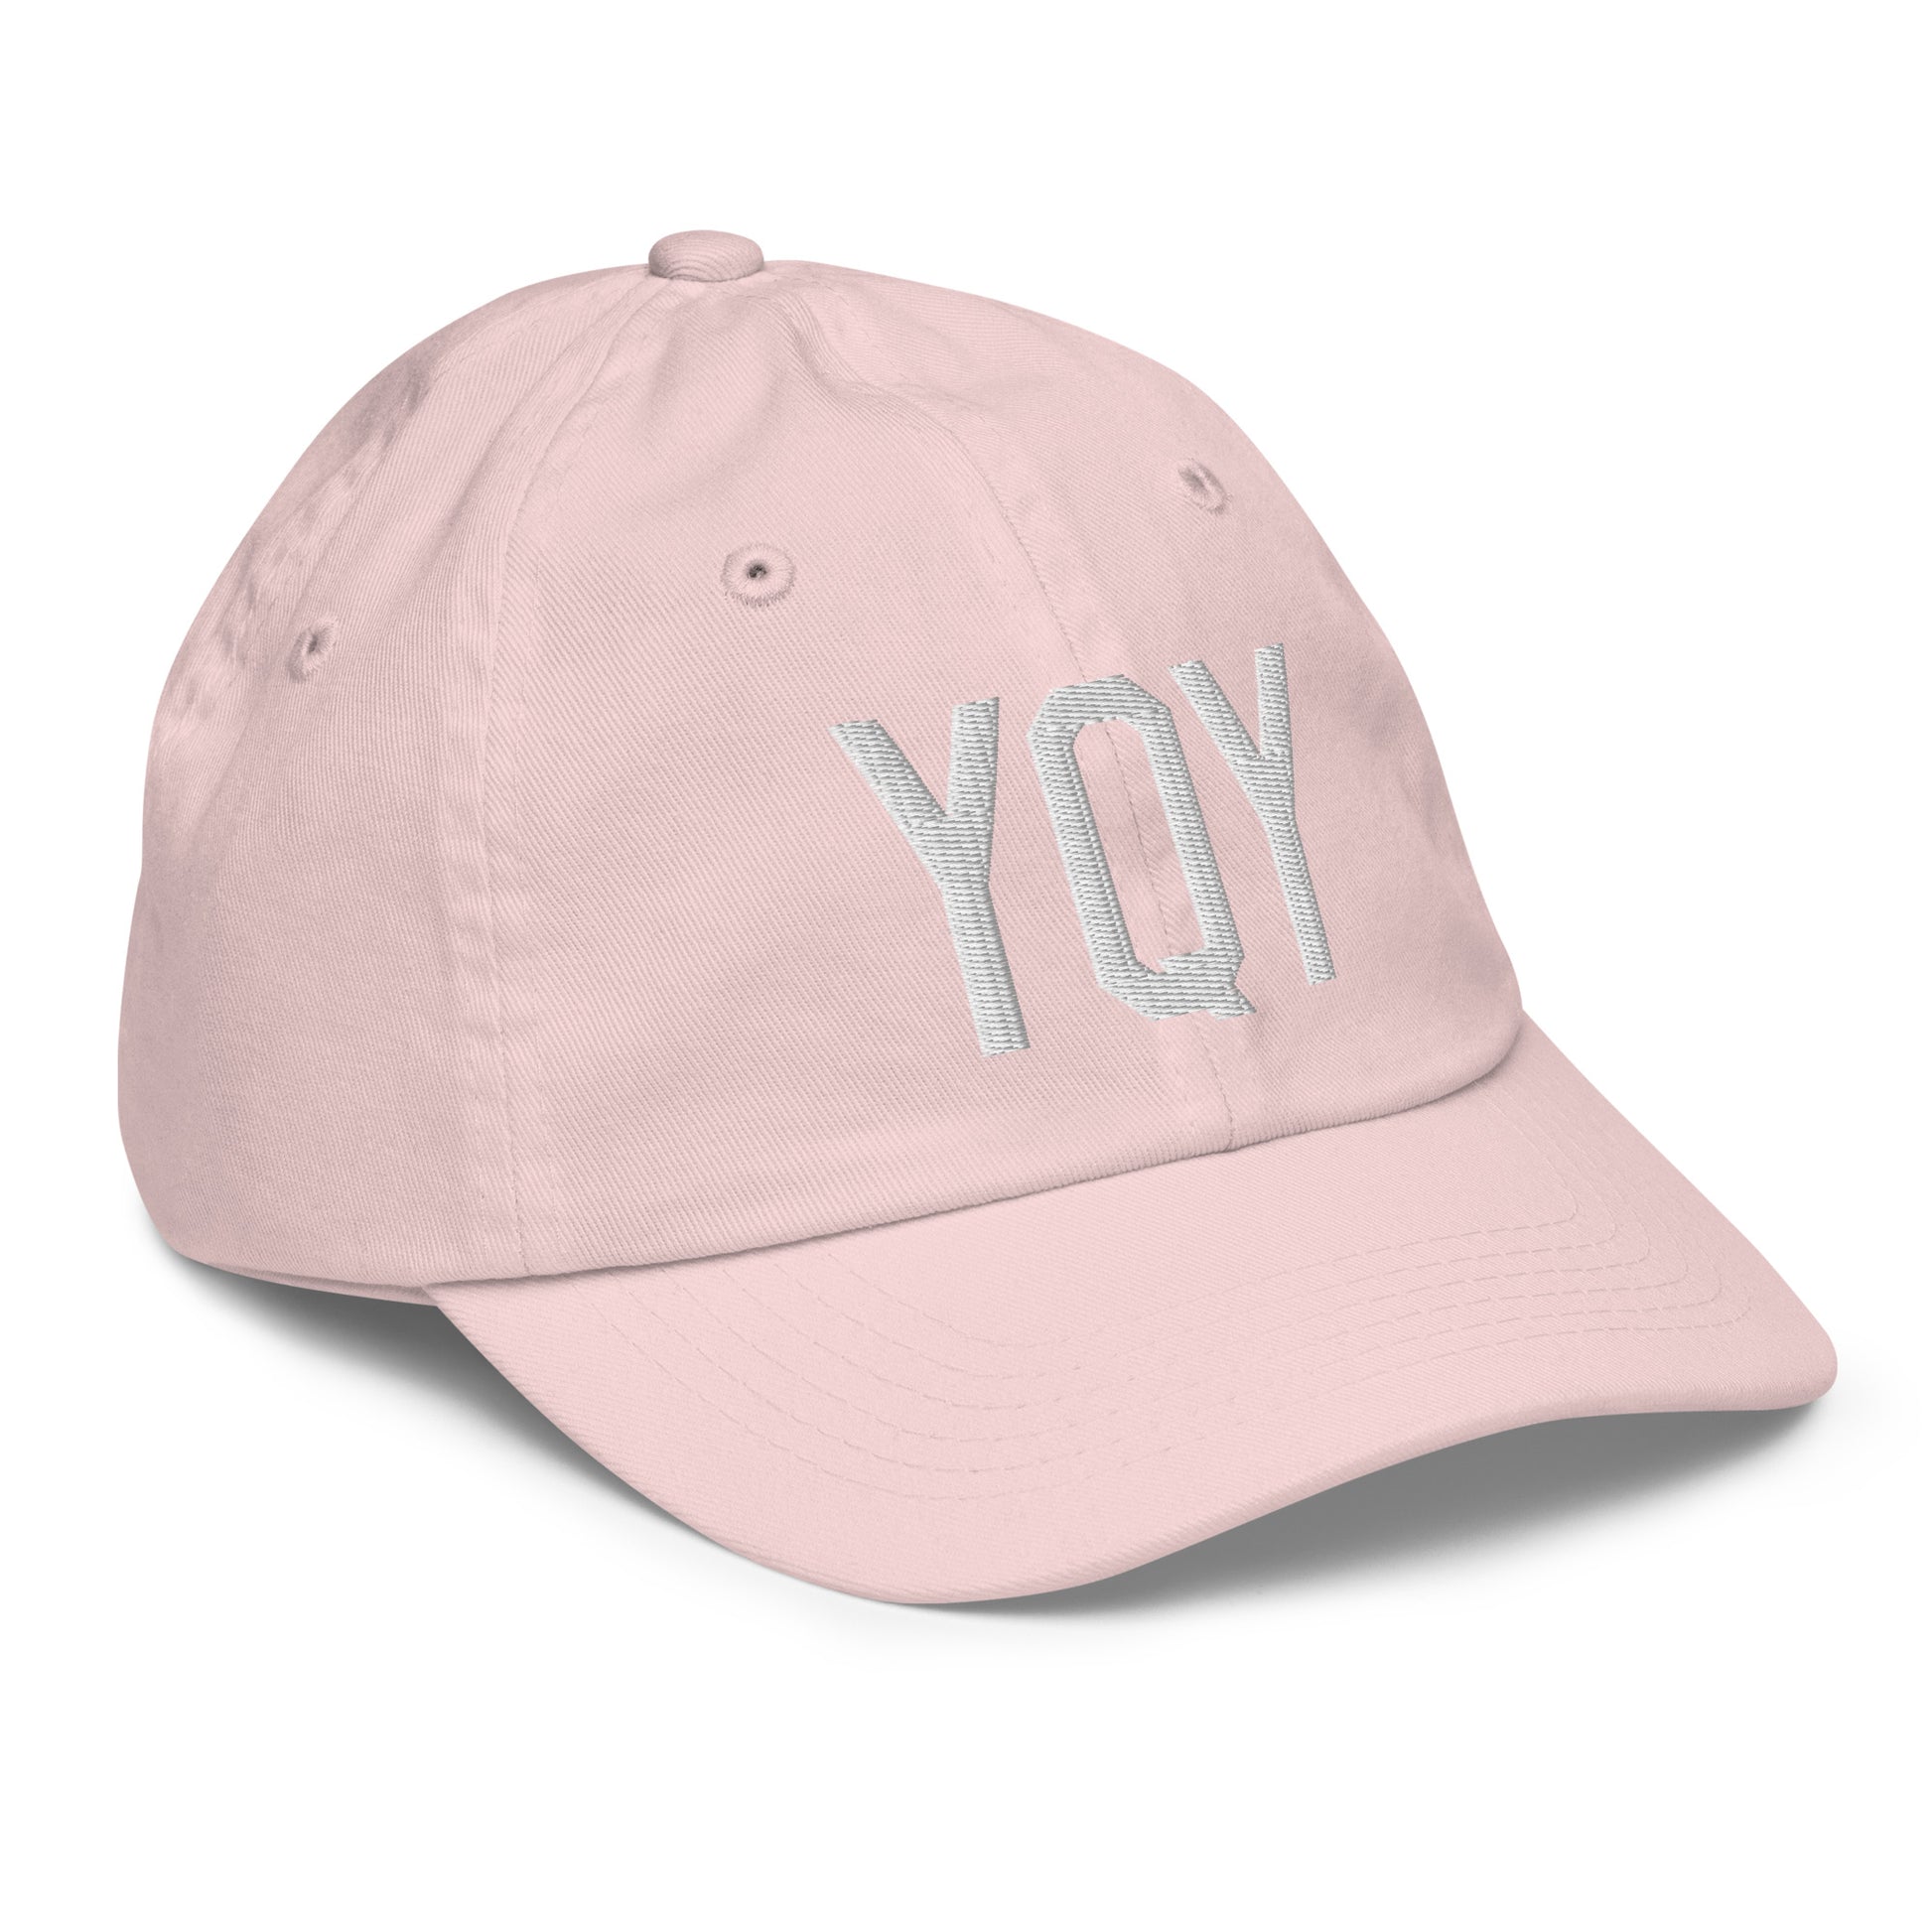 Airport Code Kid's Baseball Cap - White • YQY Sydney • YHM Designs - Image 32